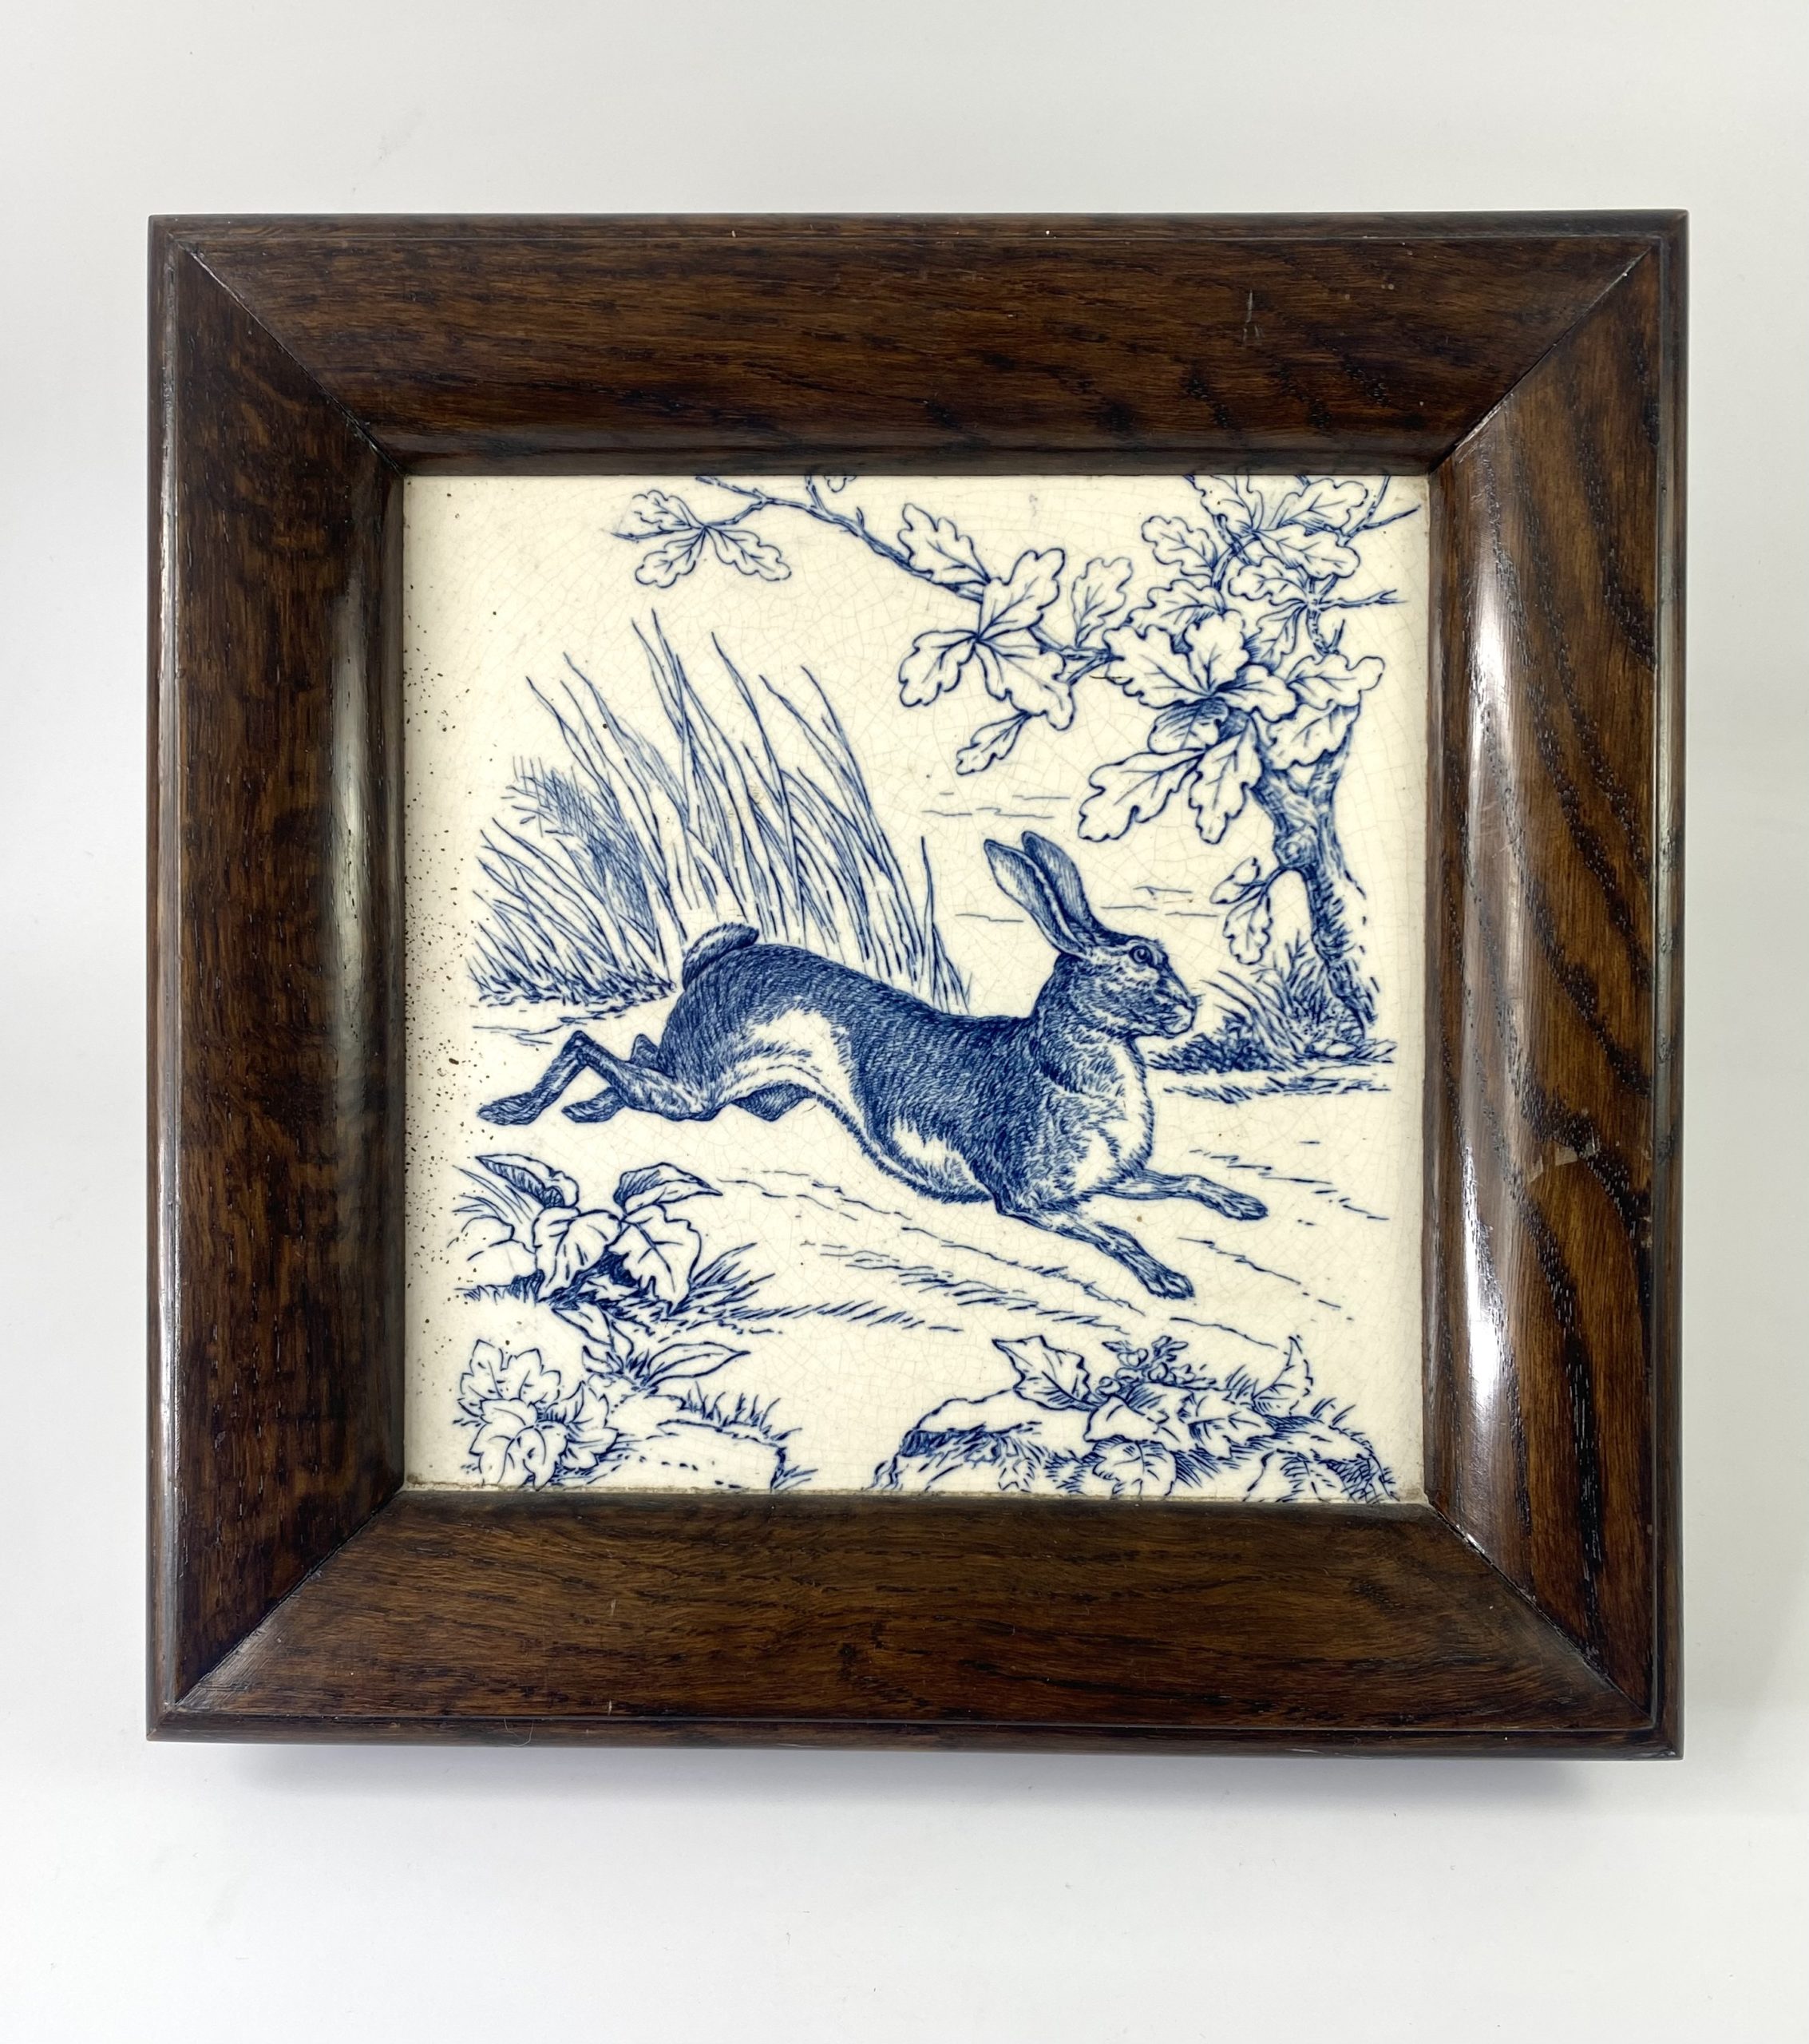 Wedgwood pottery tile. ‘Hare’, c. 1875.